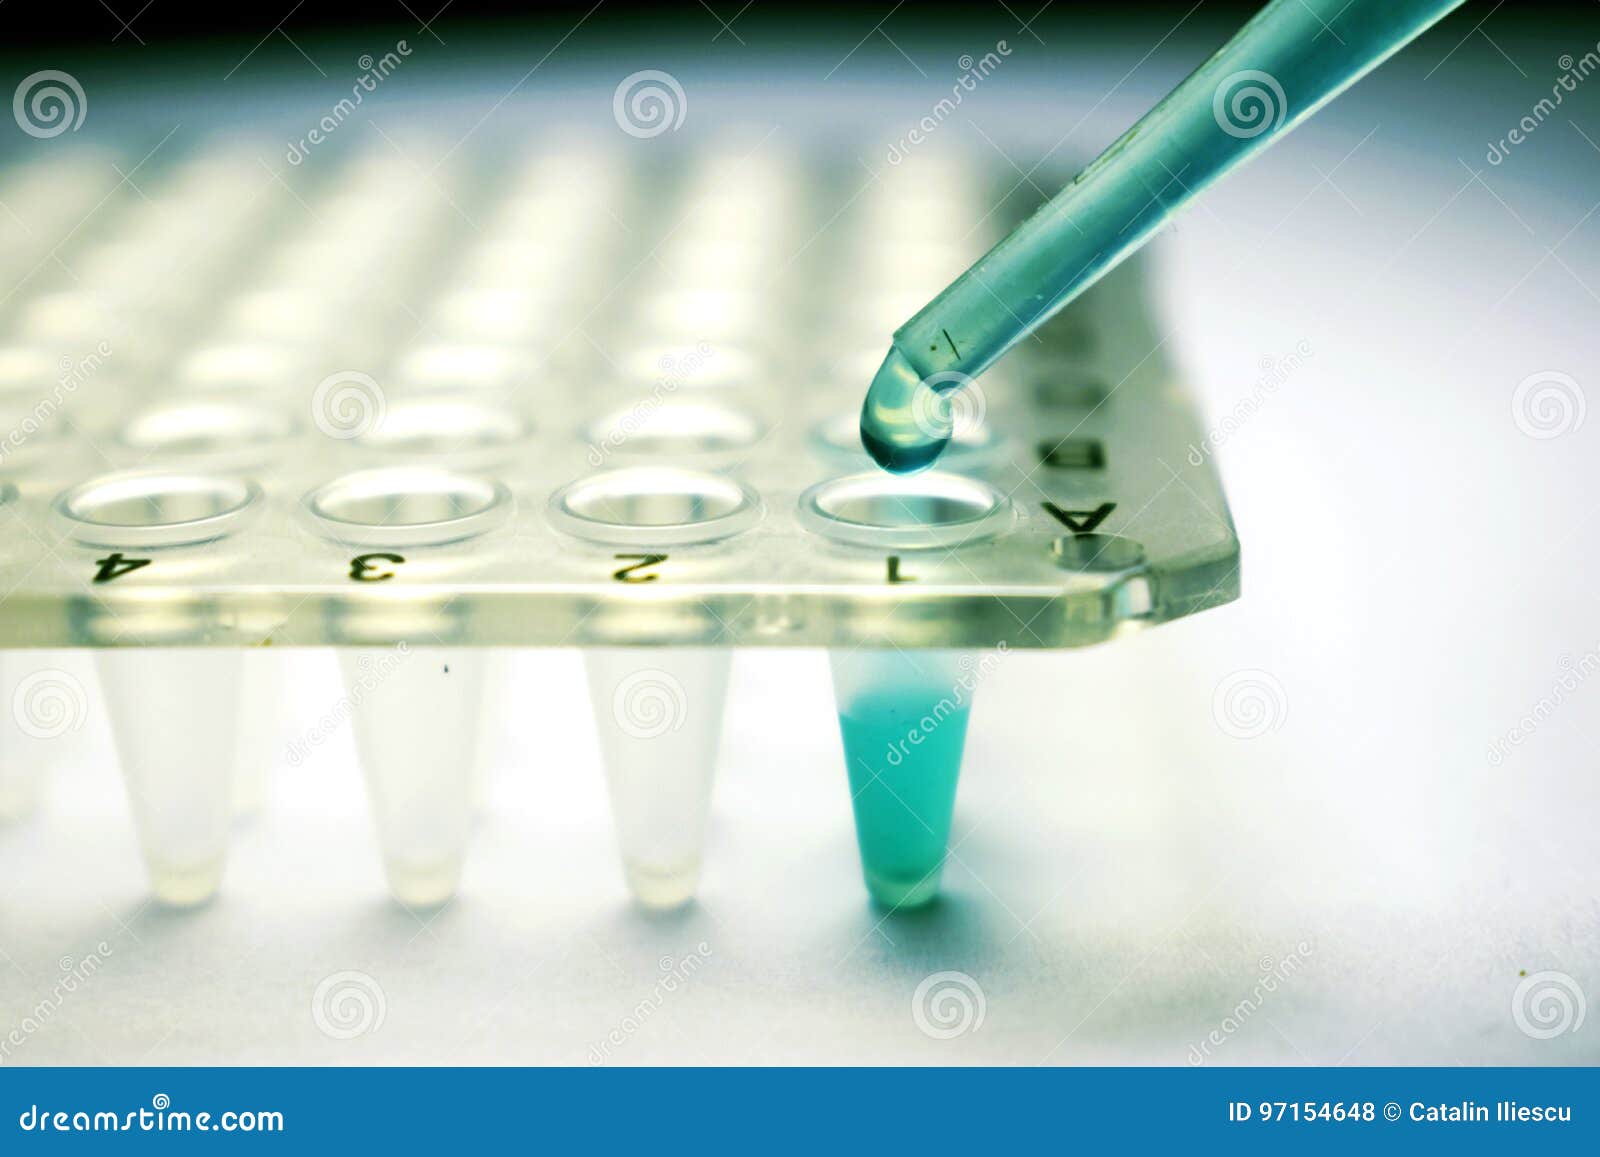 stem cell research pipette